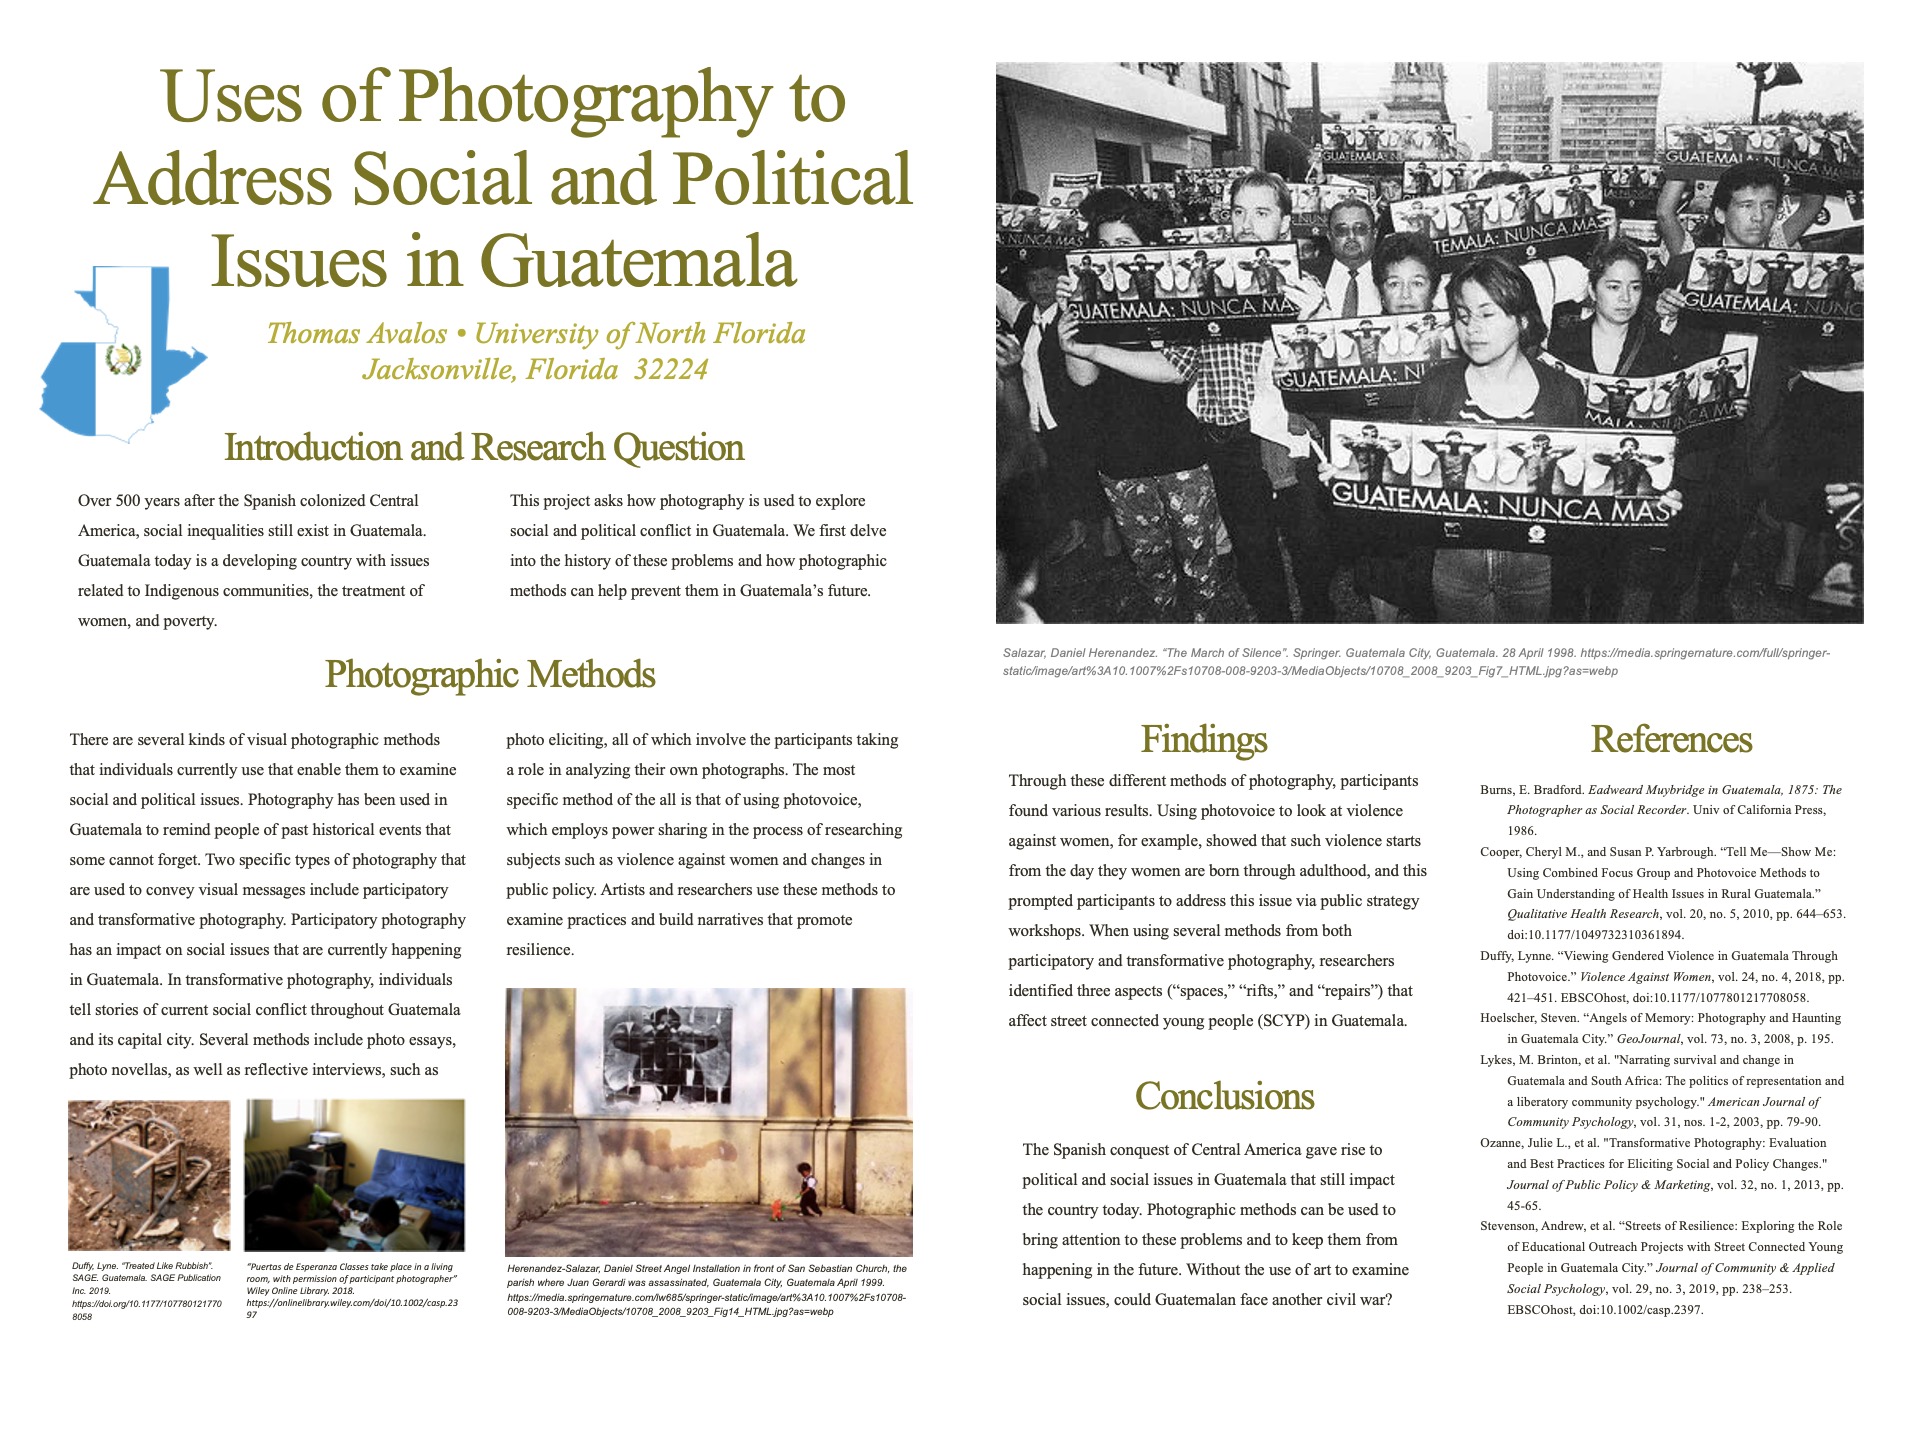 Uses of Photography to Address Social and Political Issues in Guatemala poster